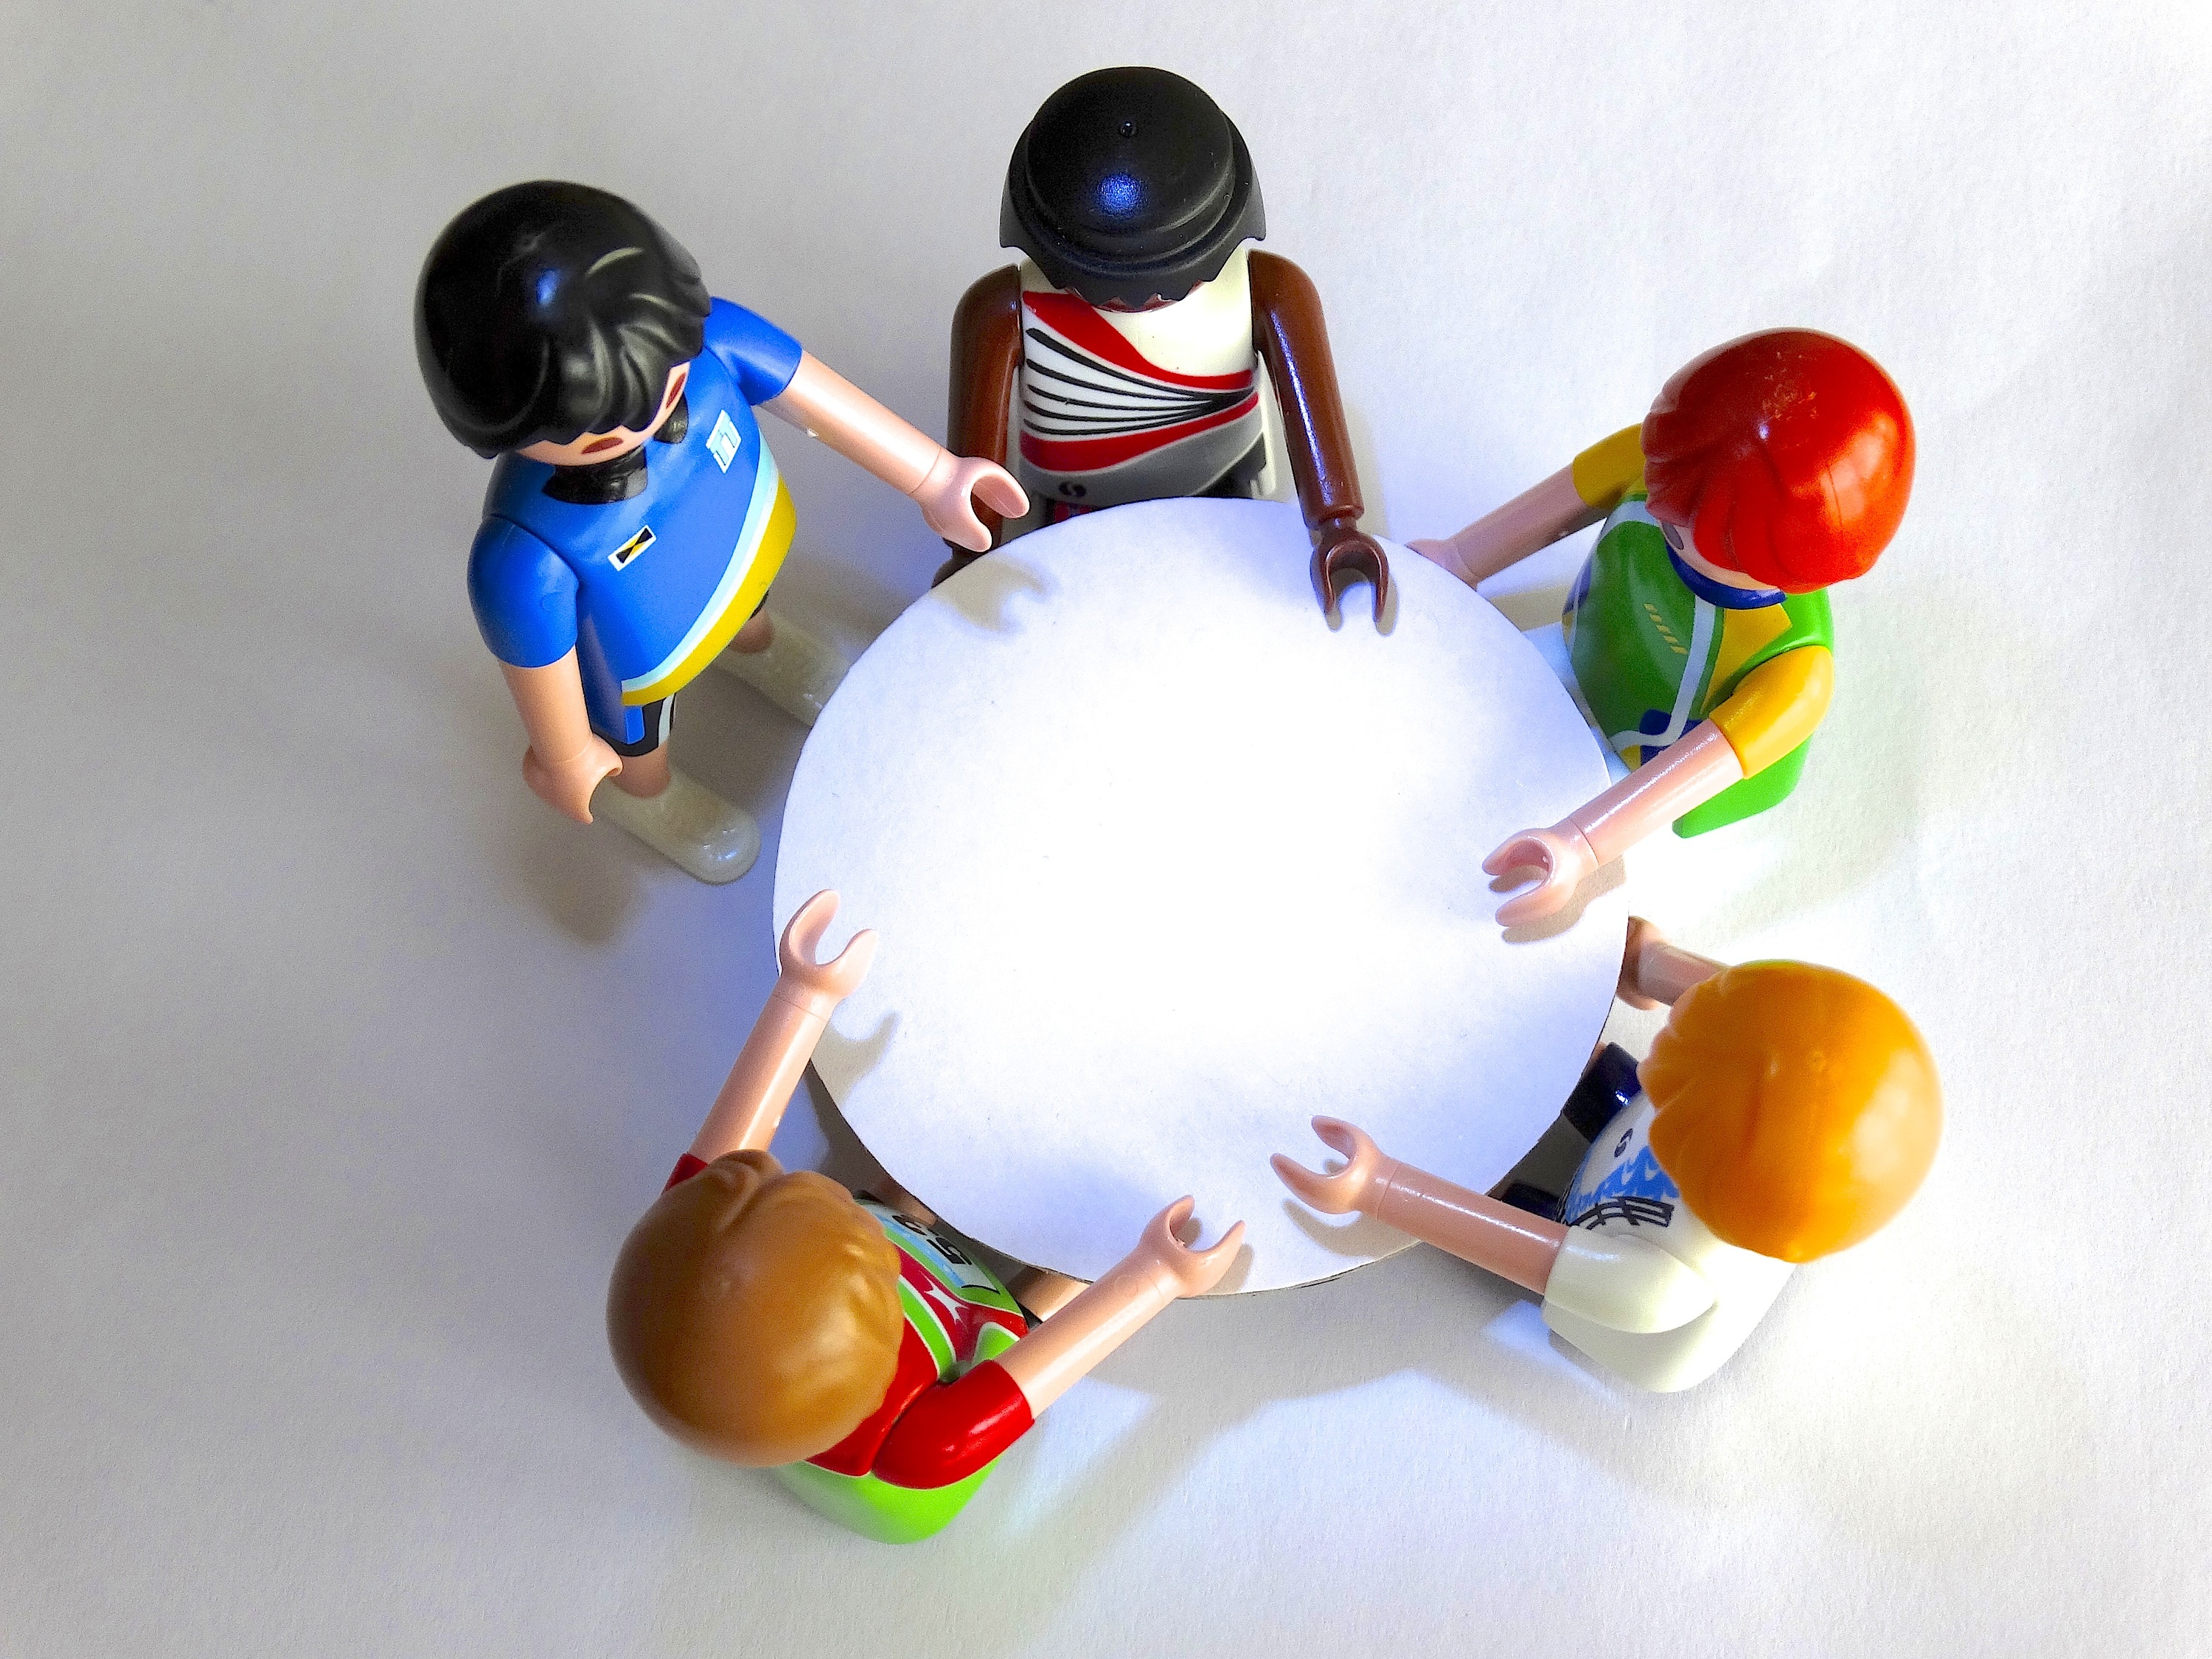 Small, lego figurines in a circle around a mini table.